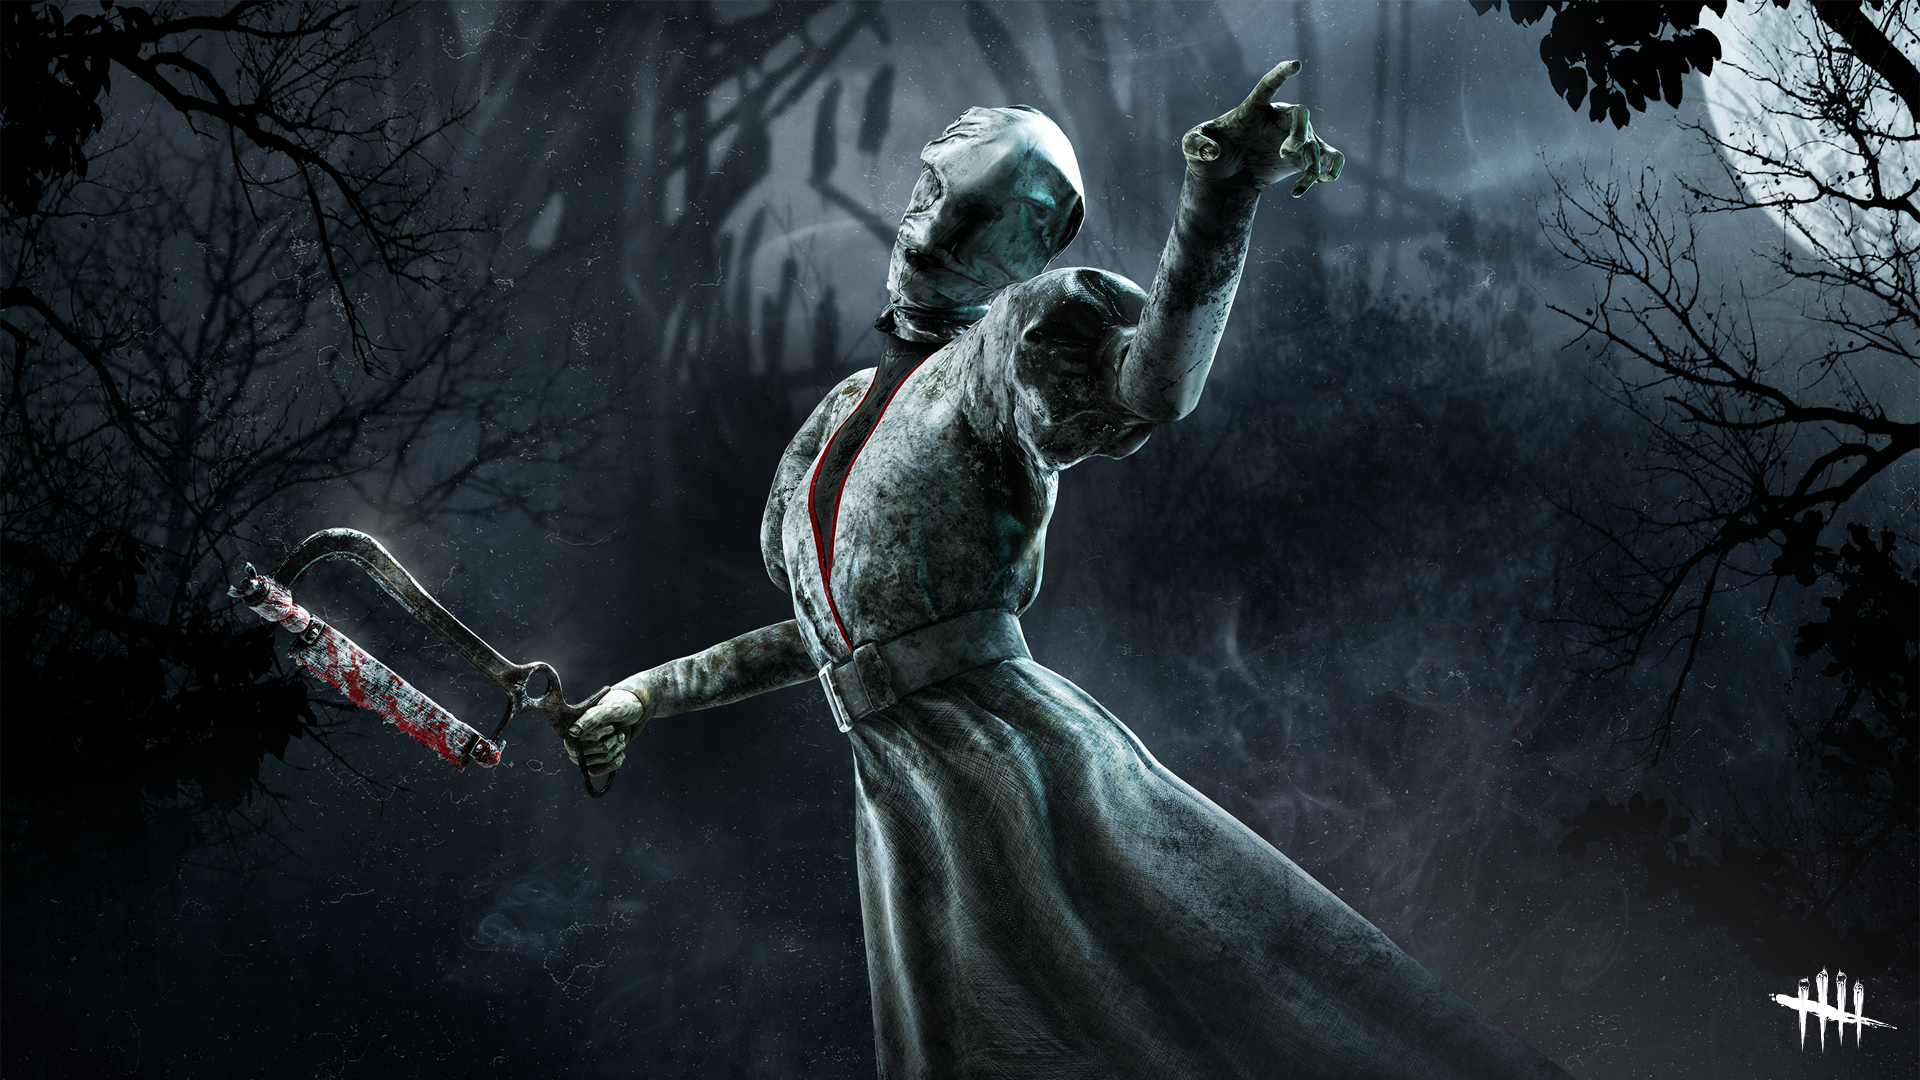 Dead By Daylight Killers Lore Powers Weapons And Perks Pocket Tactics